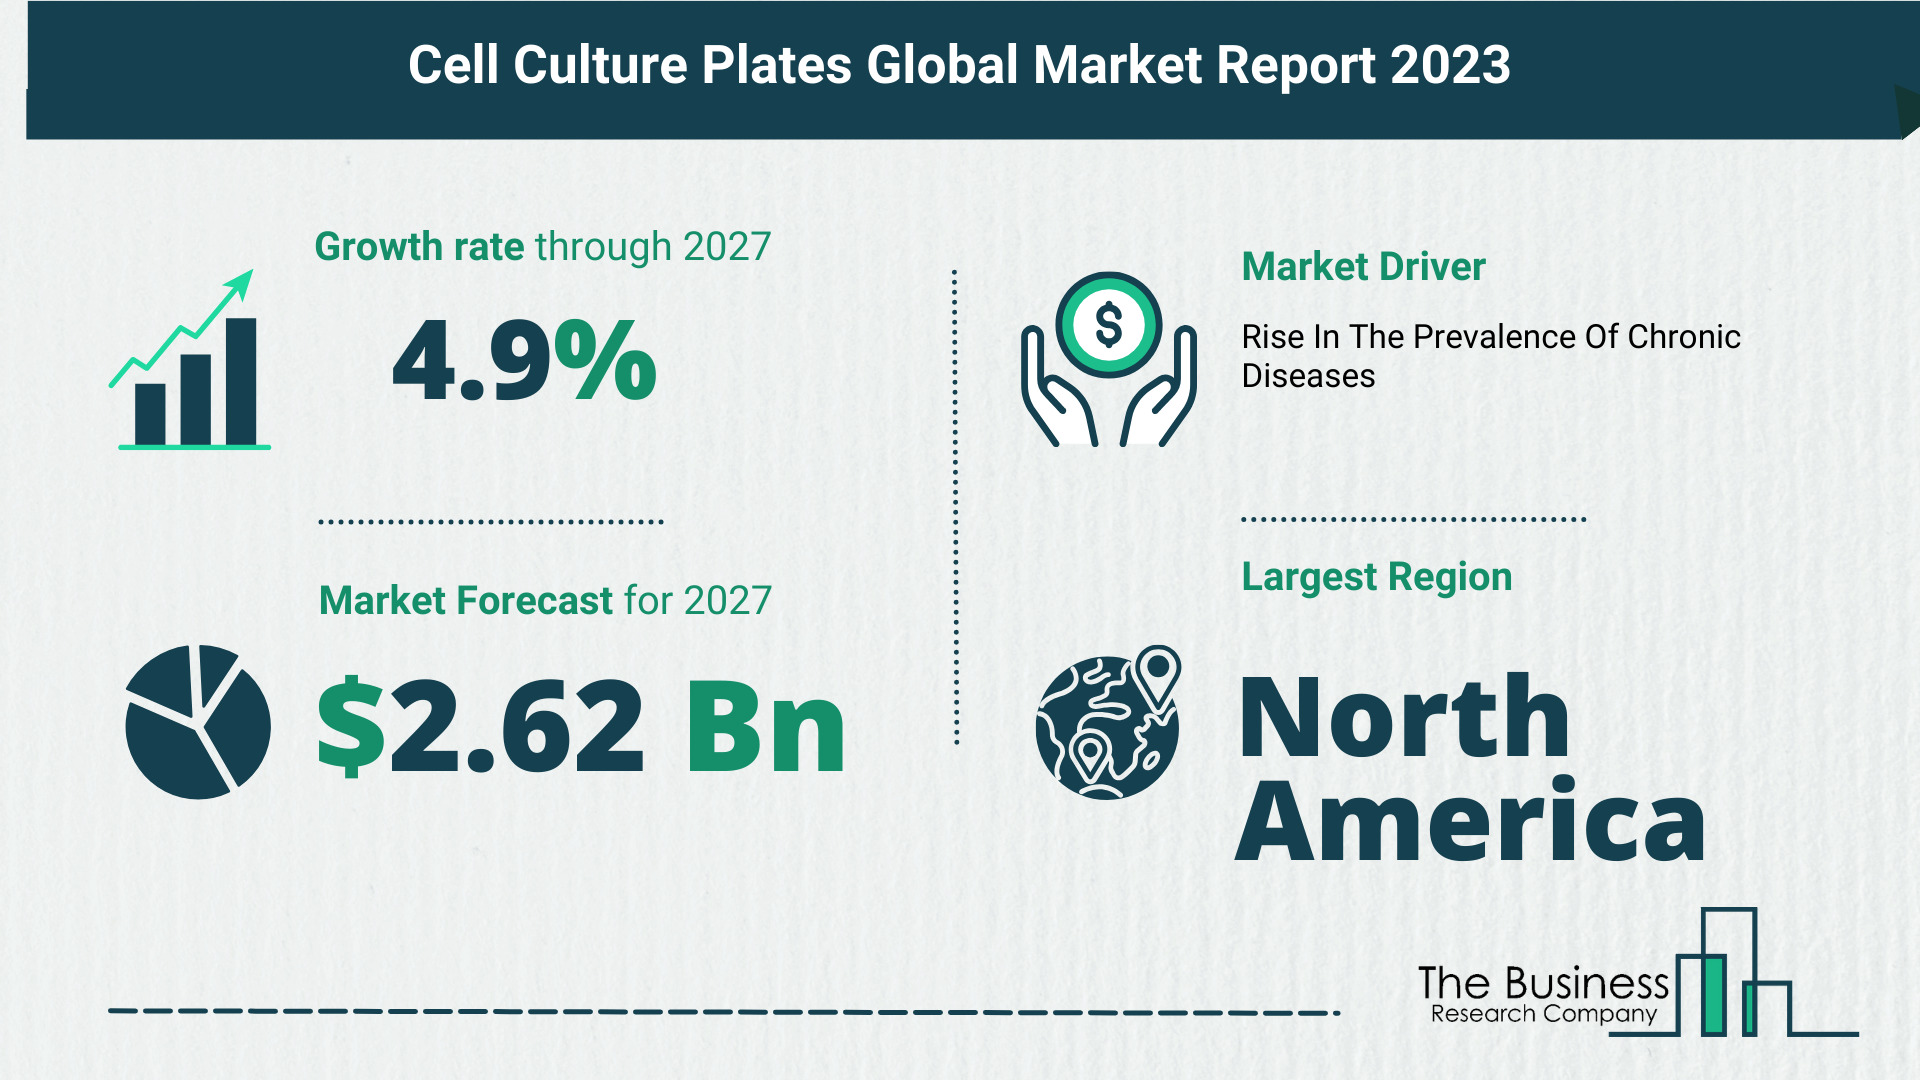 Global Cell Culture Plates Market